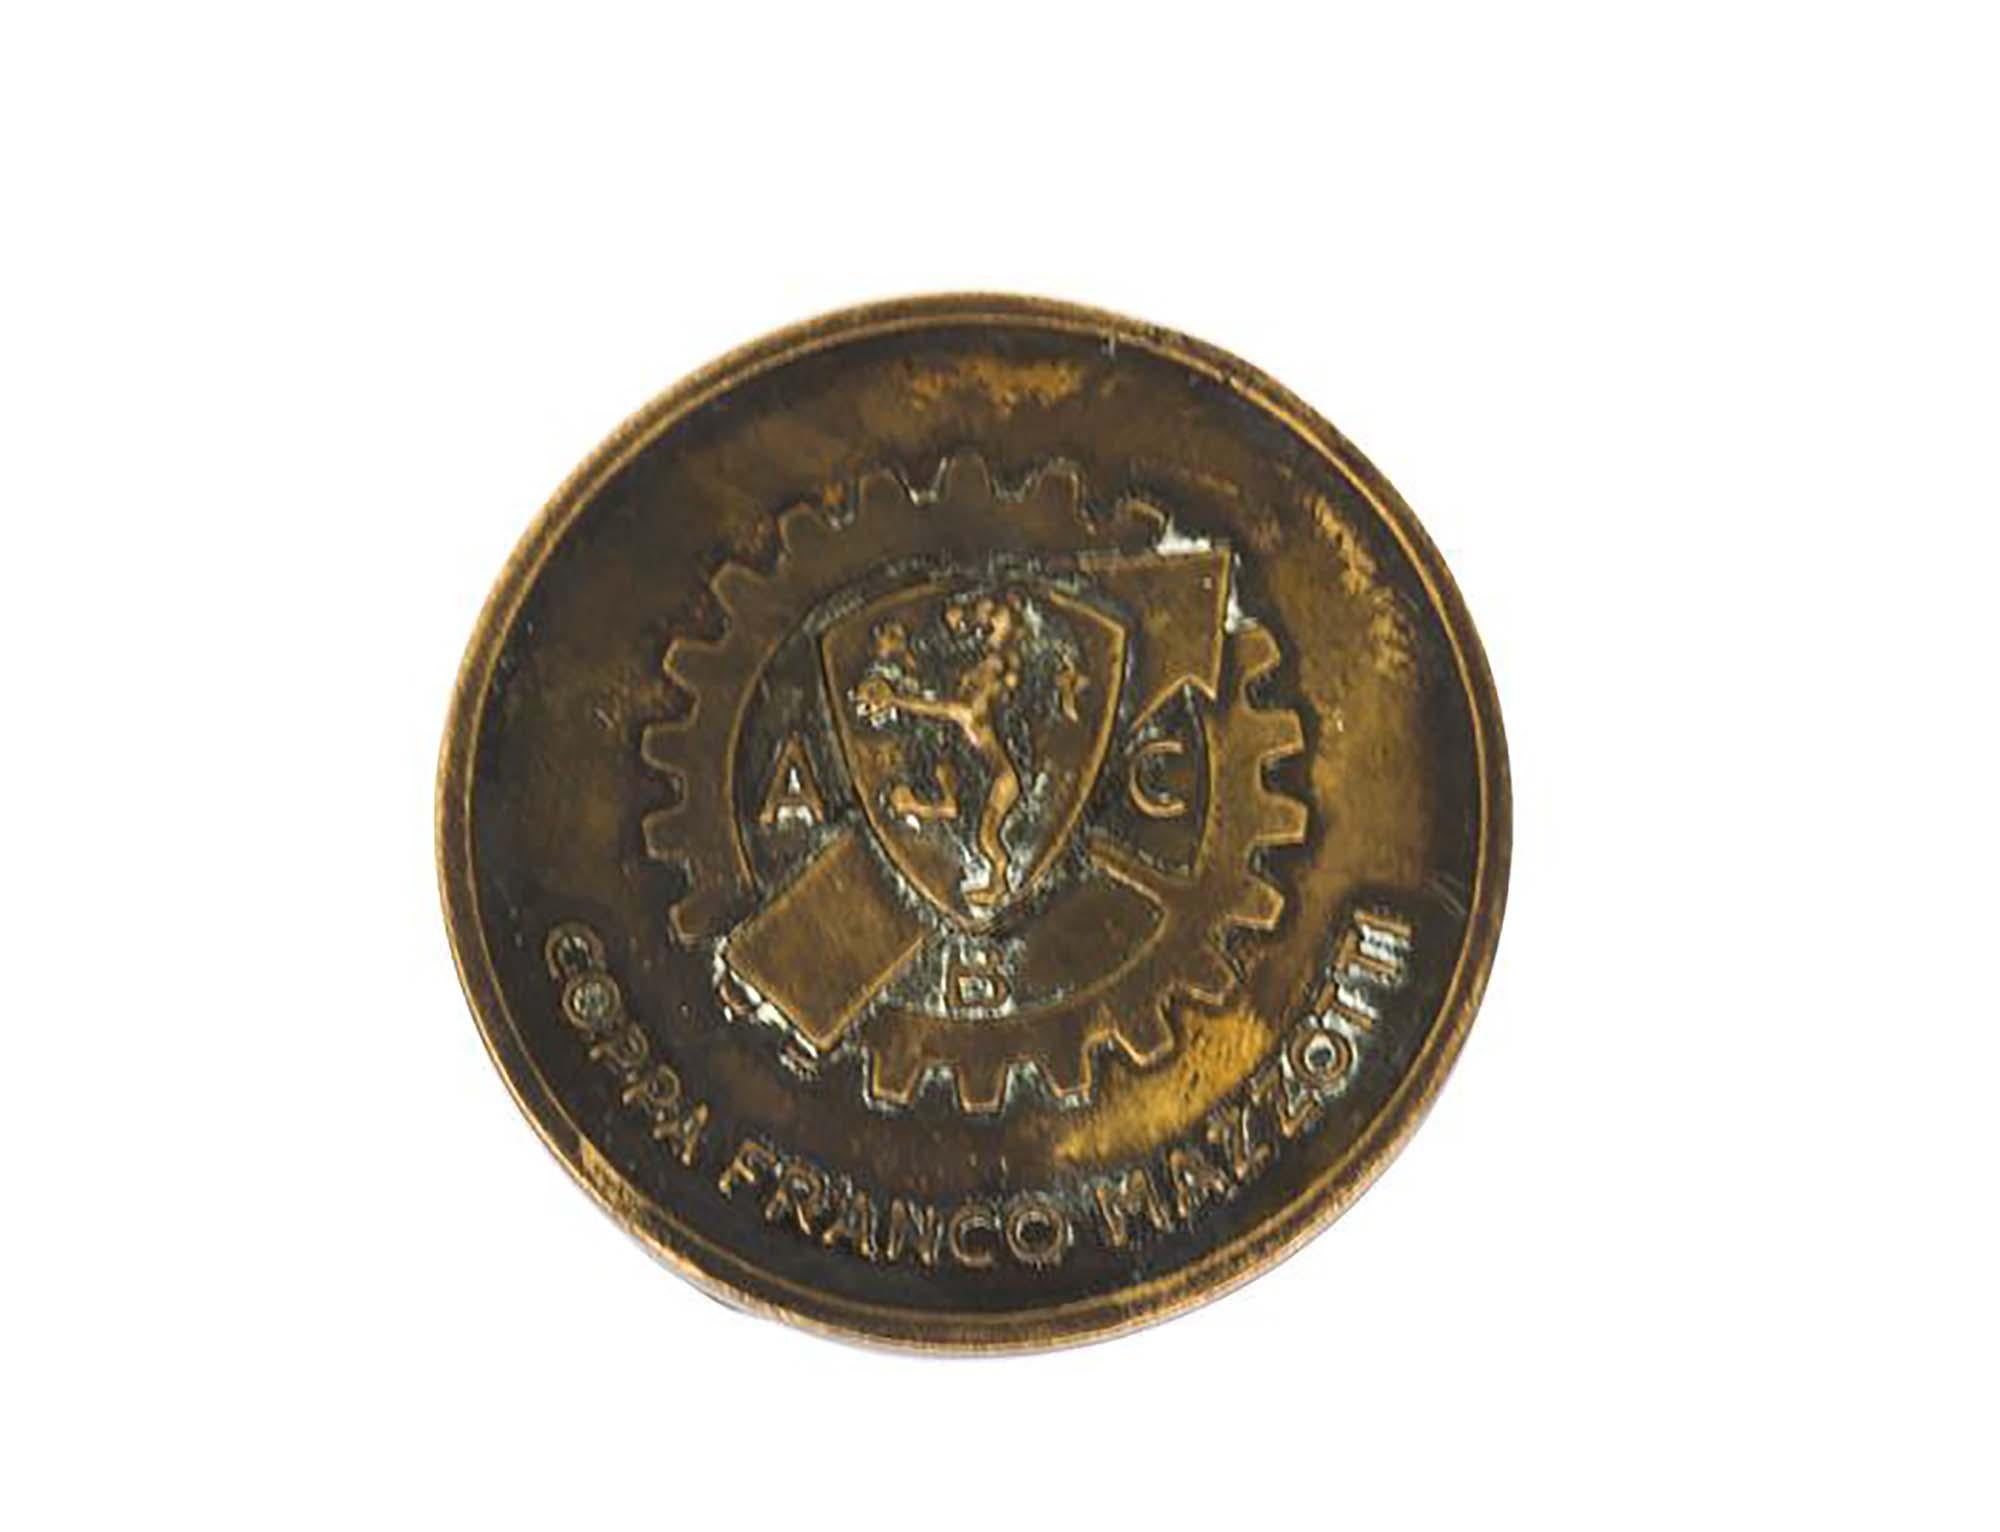 Vintage XVIII Mille Miglia bronze badge medal coin
Made in Italy, 1951

The Mille Miglia was an open-road, motorsport endurance race established in 1927 by the young Counts Francesco Mazzotti and Aymo Maggi, which took place in Italy twenty-four